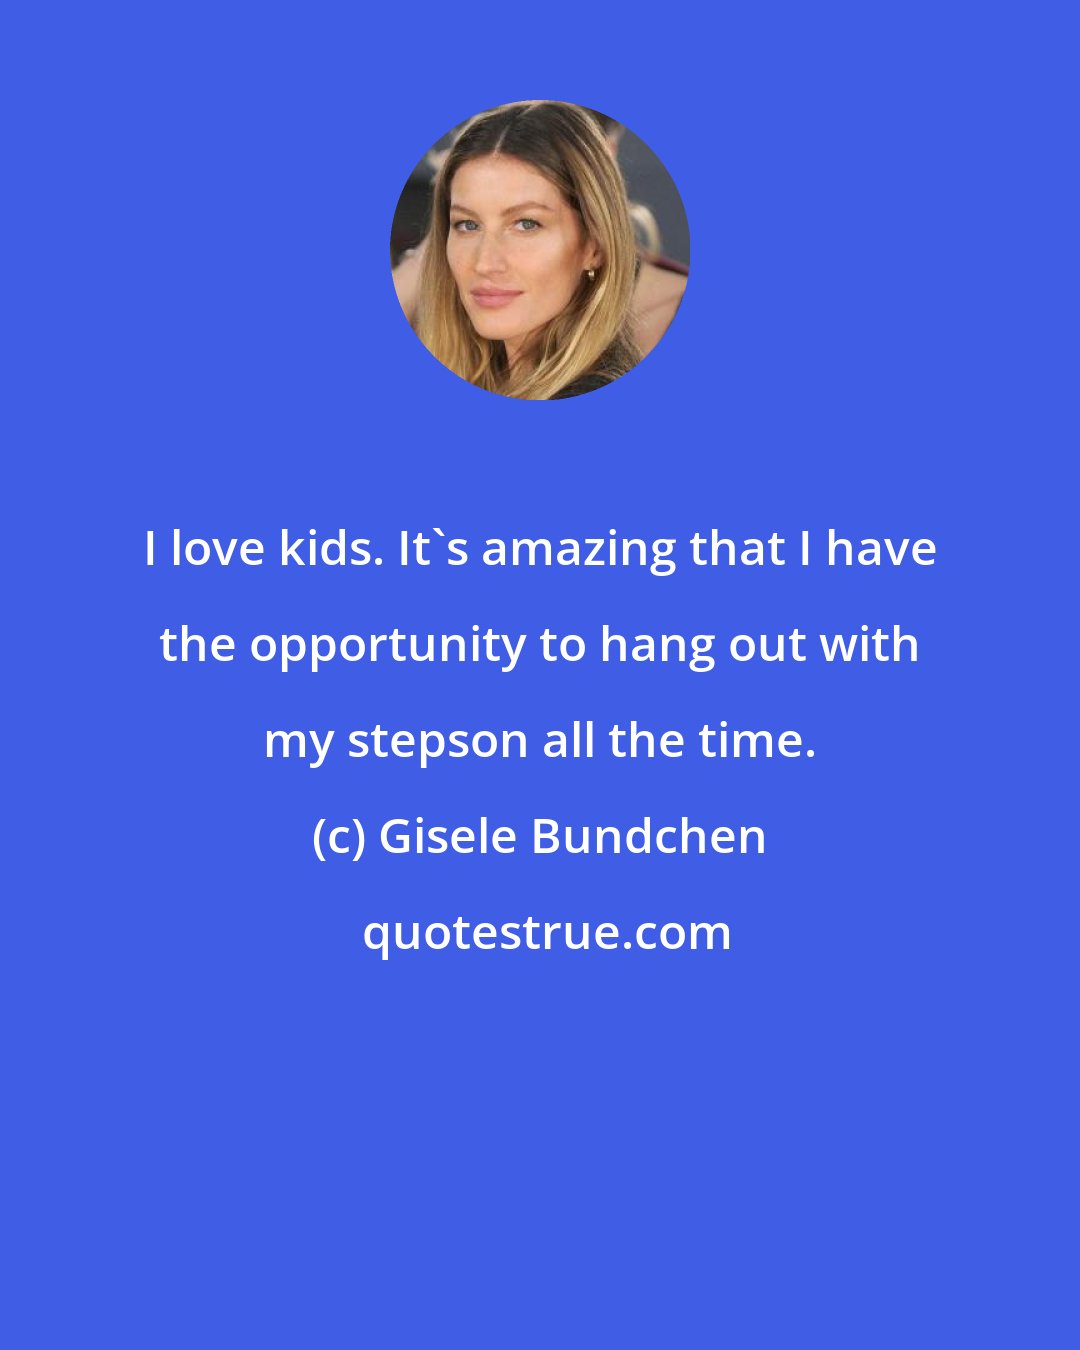 Gisele Bundchen: I love kids. It's amazing that I have the opportunity to hang out with my stepson all the time.